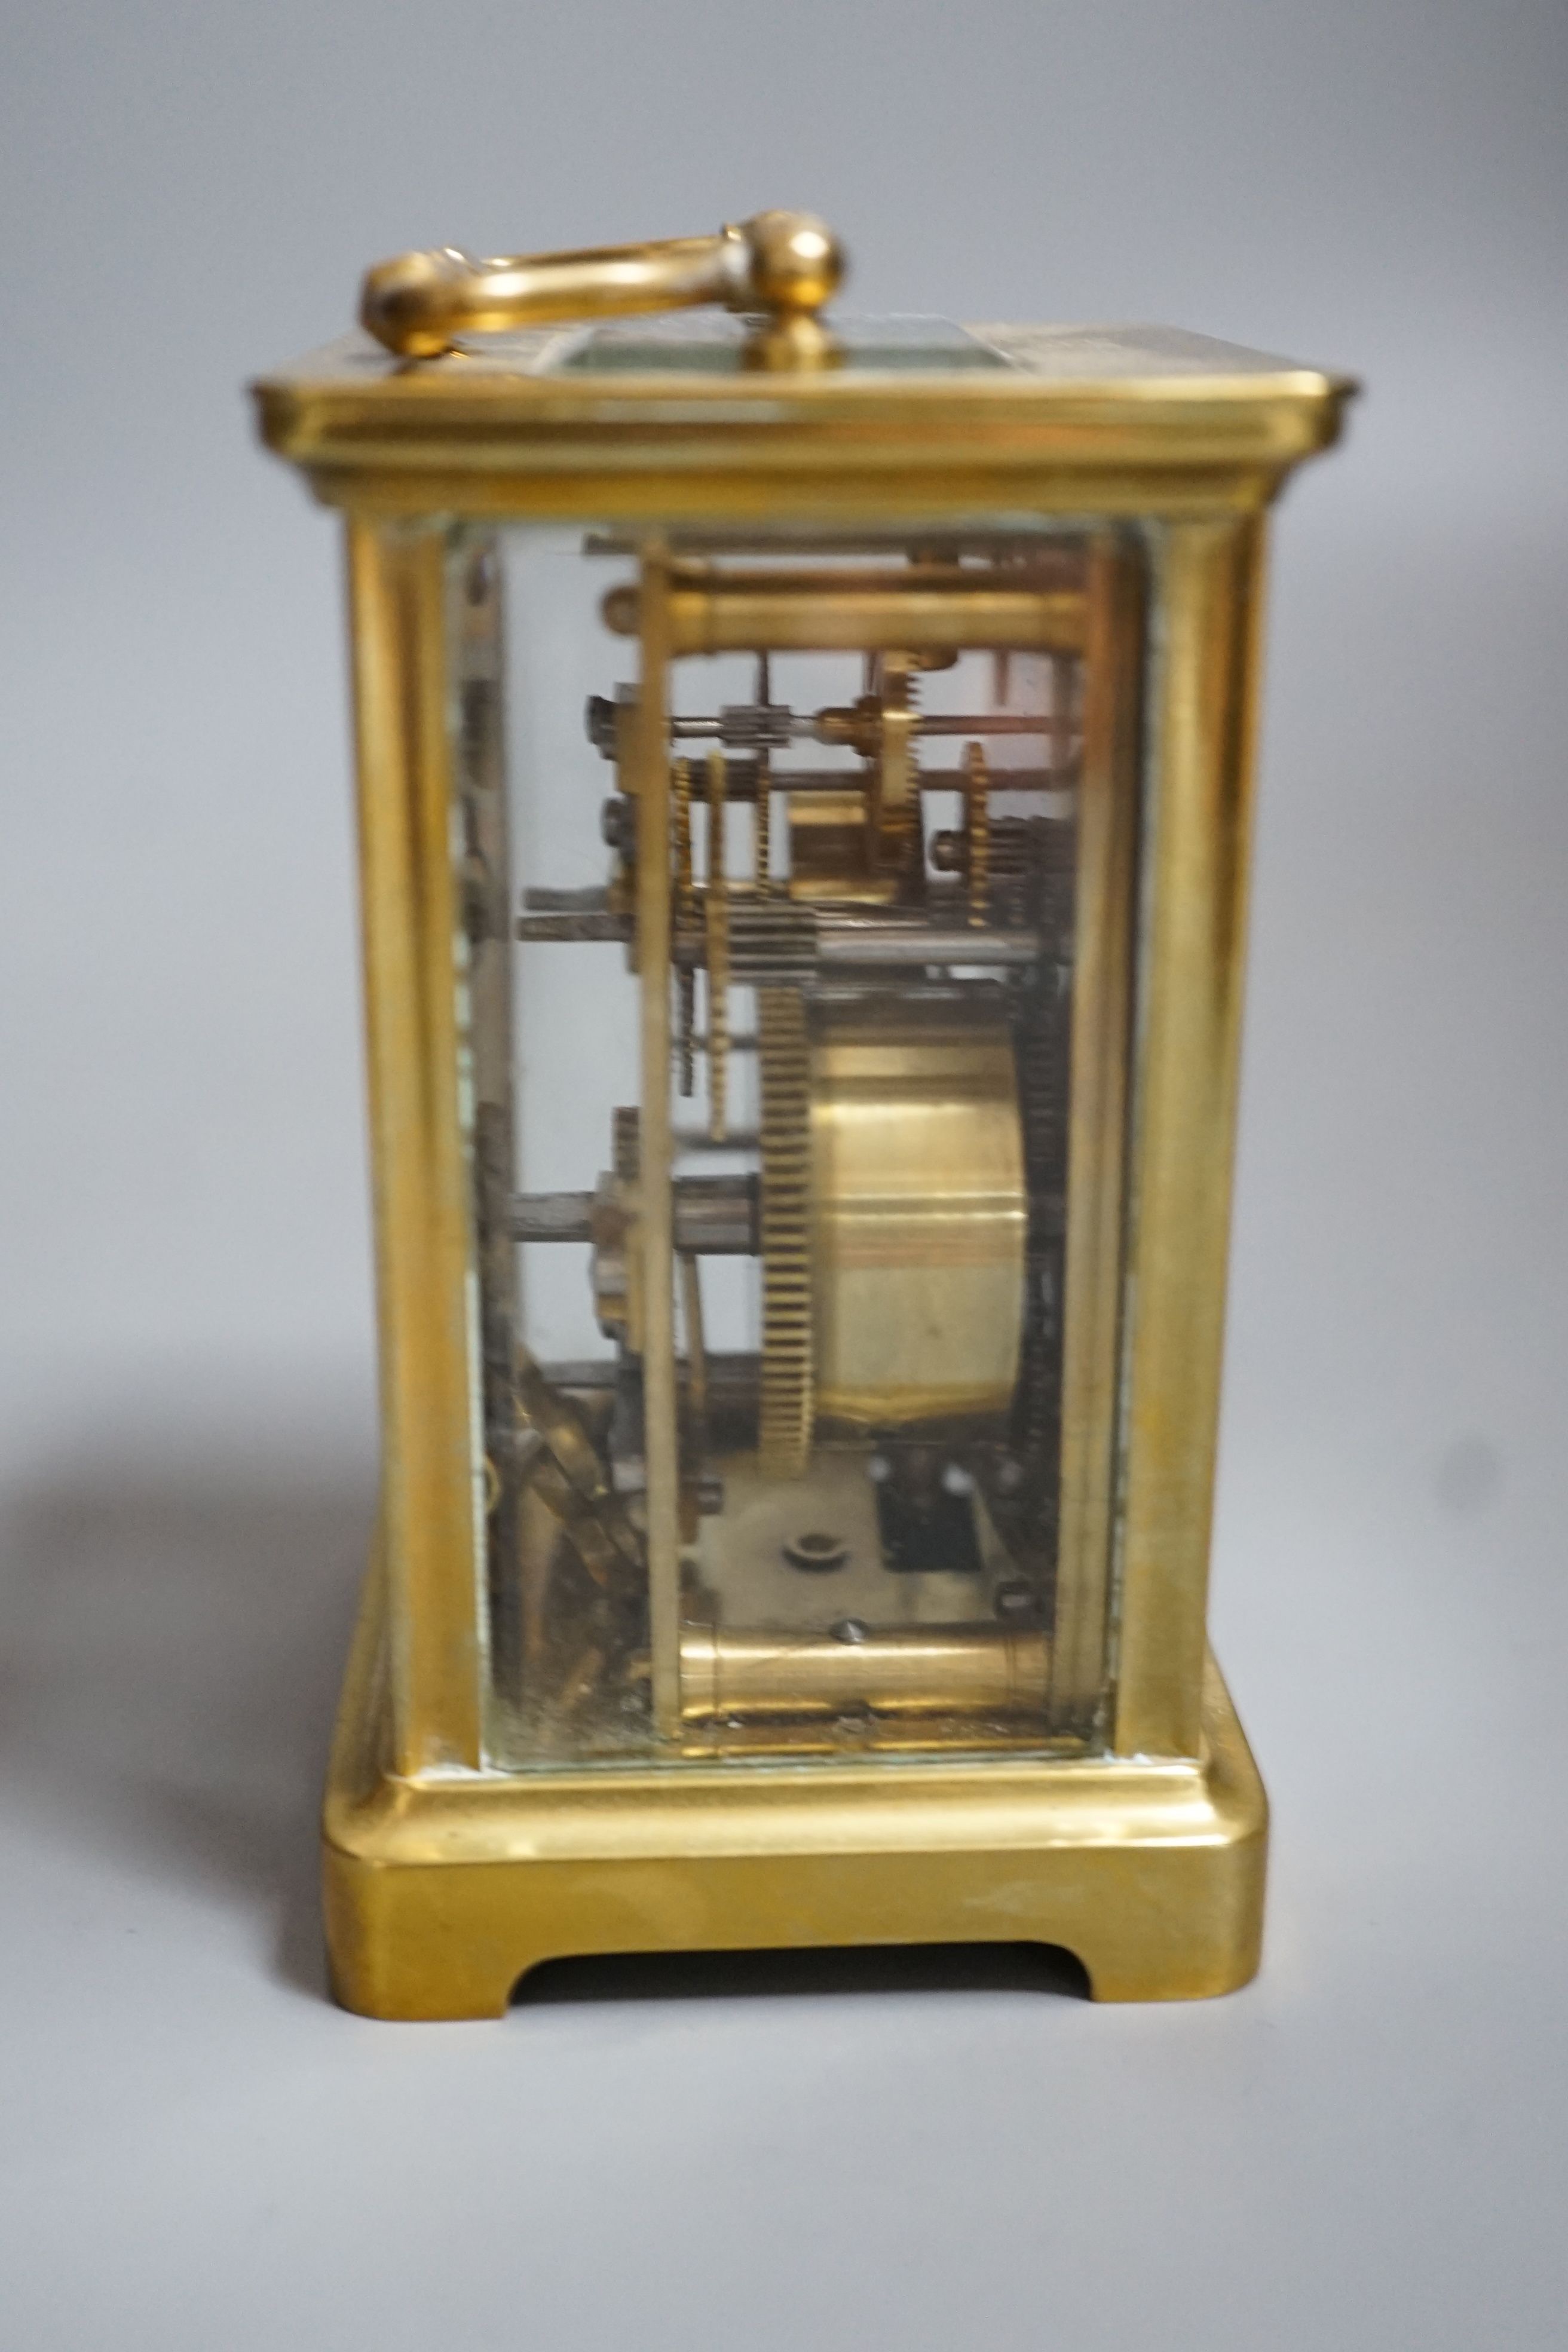 French carriage timepiece with original box and receipts - key included, 11cm high - Image 3 of 4